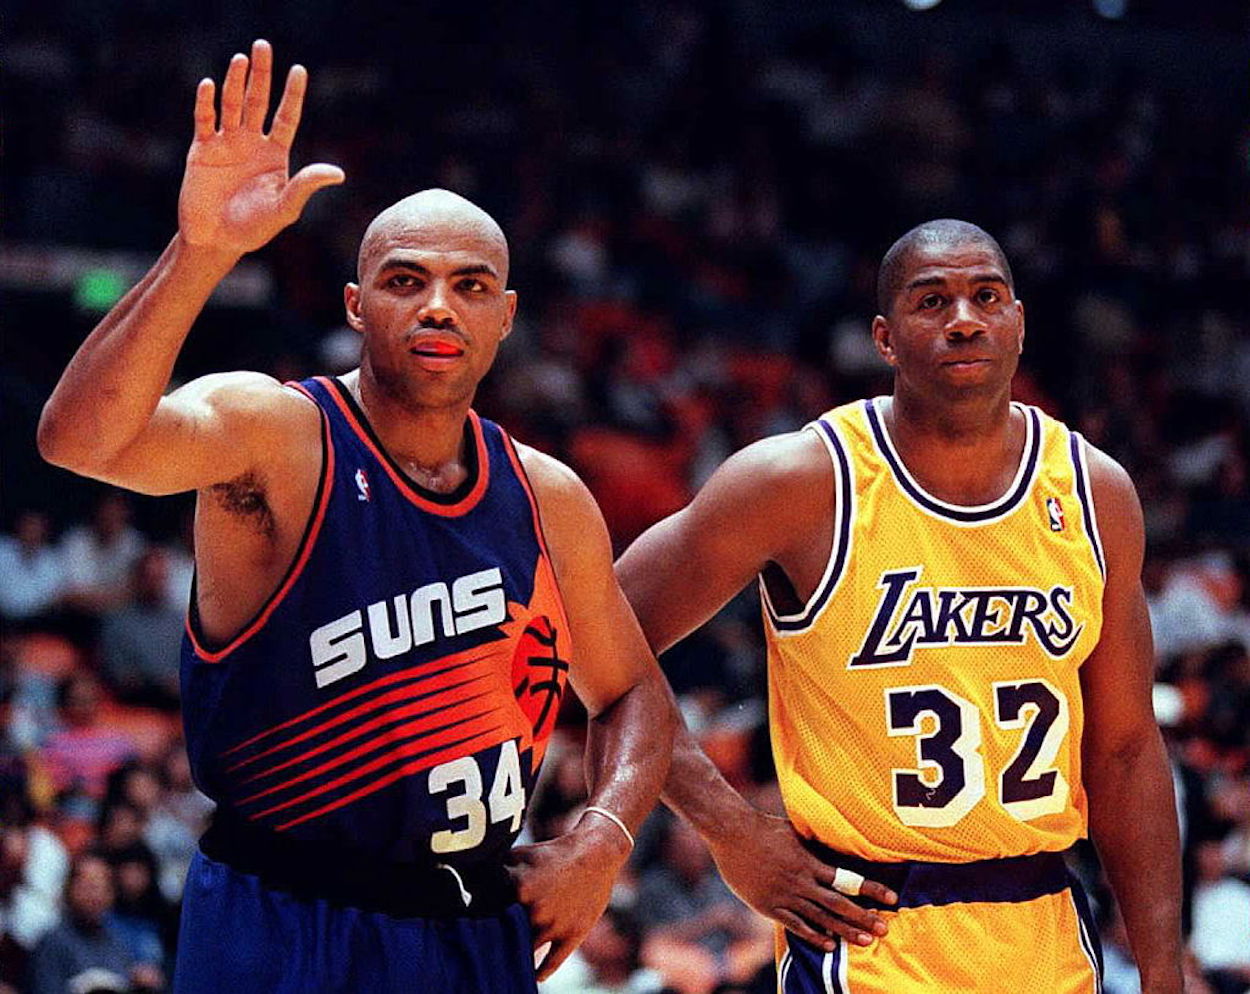 Charles Barkley (L) stands next to Magic Johnson during their NBA careers.